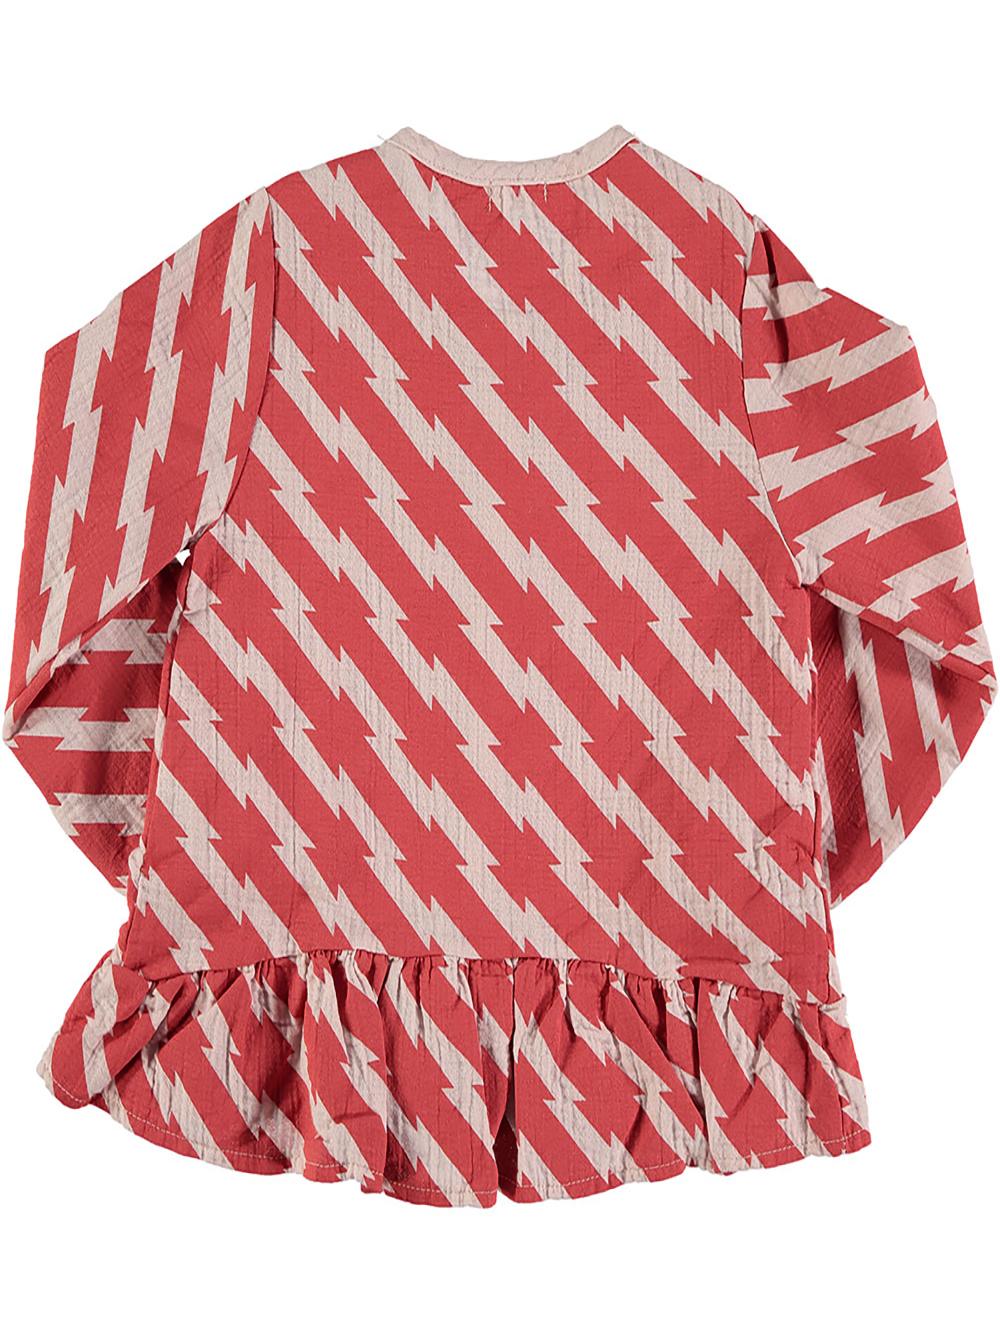 PINK RUFFLED SHIRT WITH RED STRIPES PRINT